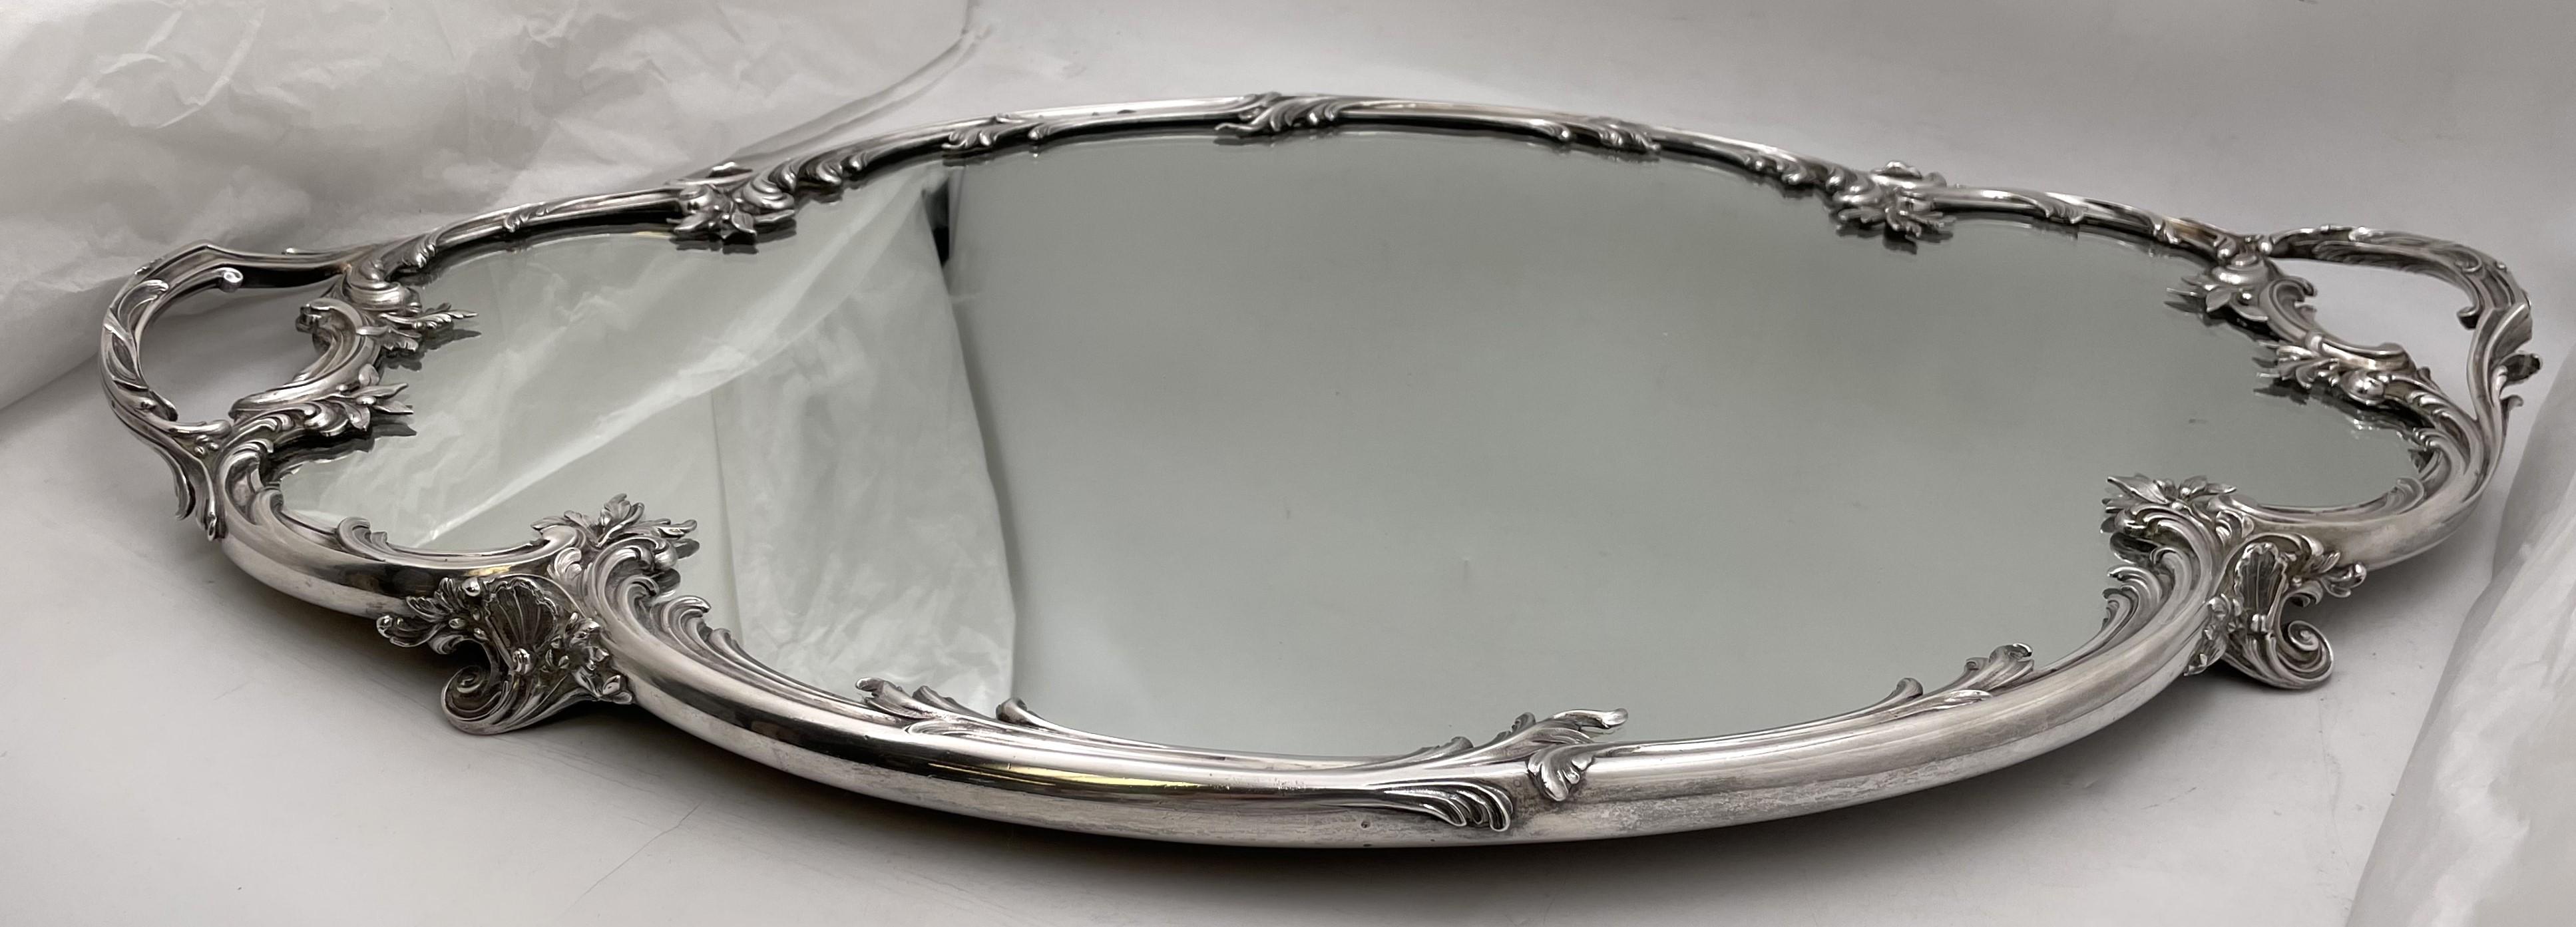 Cardeilhac French Sterling Silver Mirrored Plateau & Centerpiece Bowl Rococo For Sale 8